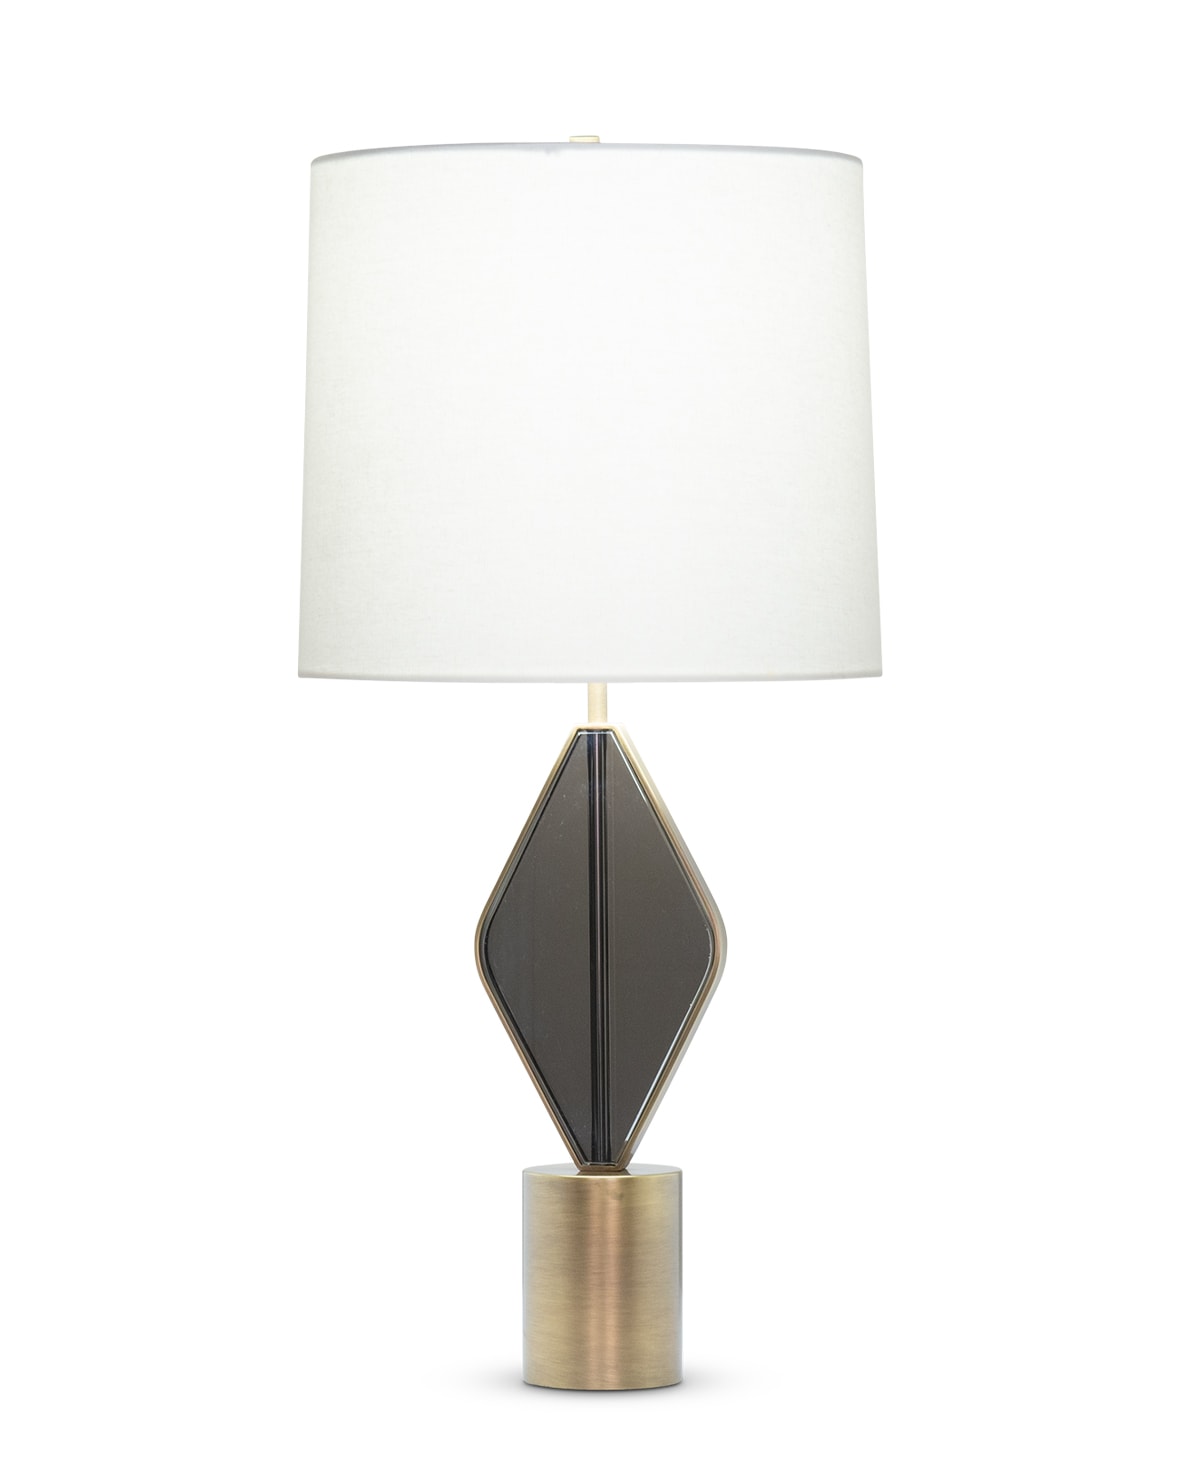 FlowDecor Tyler Table Lamp in crystal with smoked and metal with antique brass finish and off-white linen tapered drum shade (# 4528)